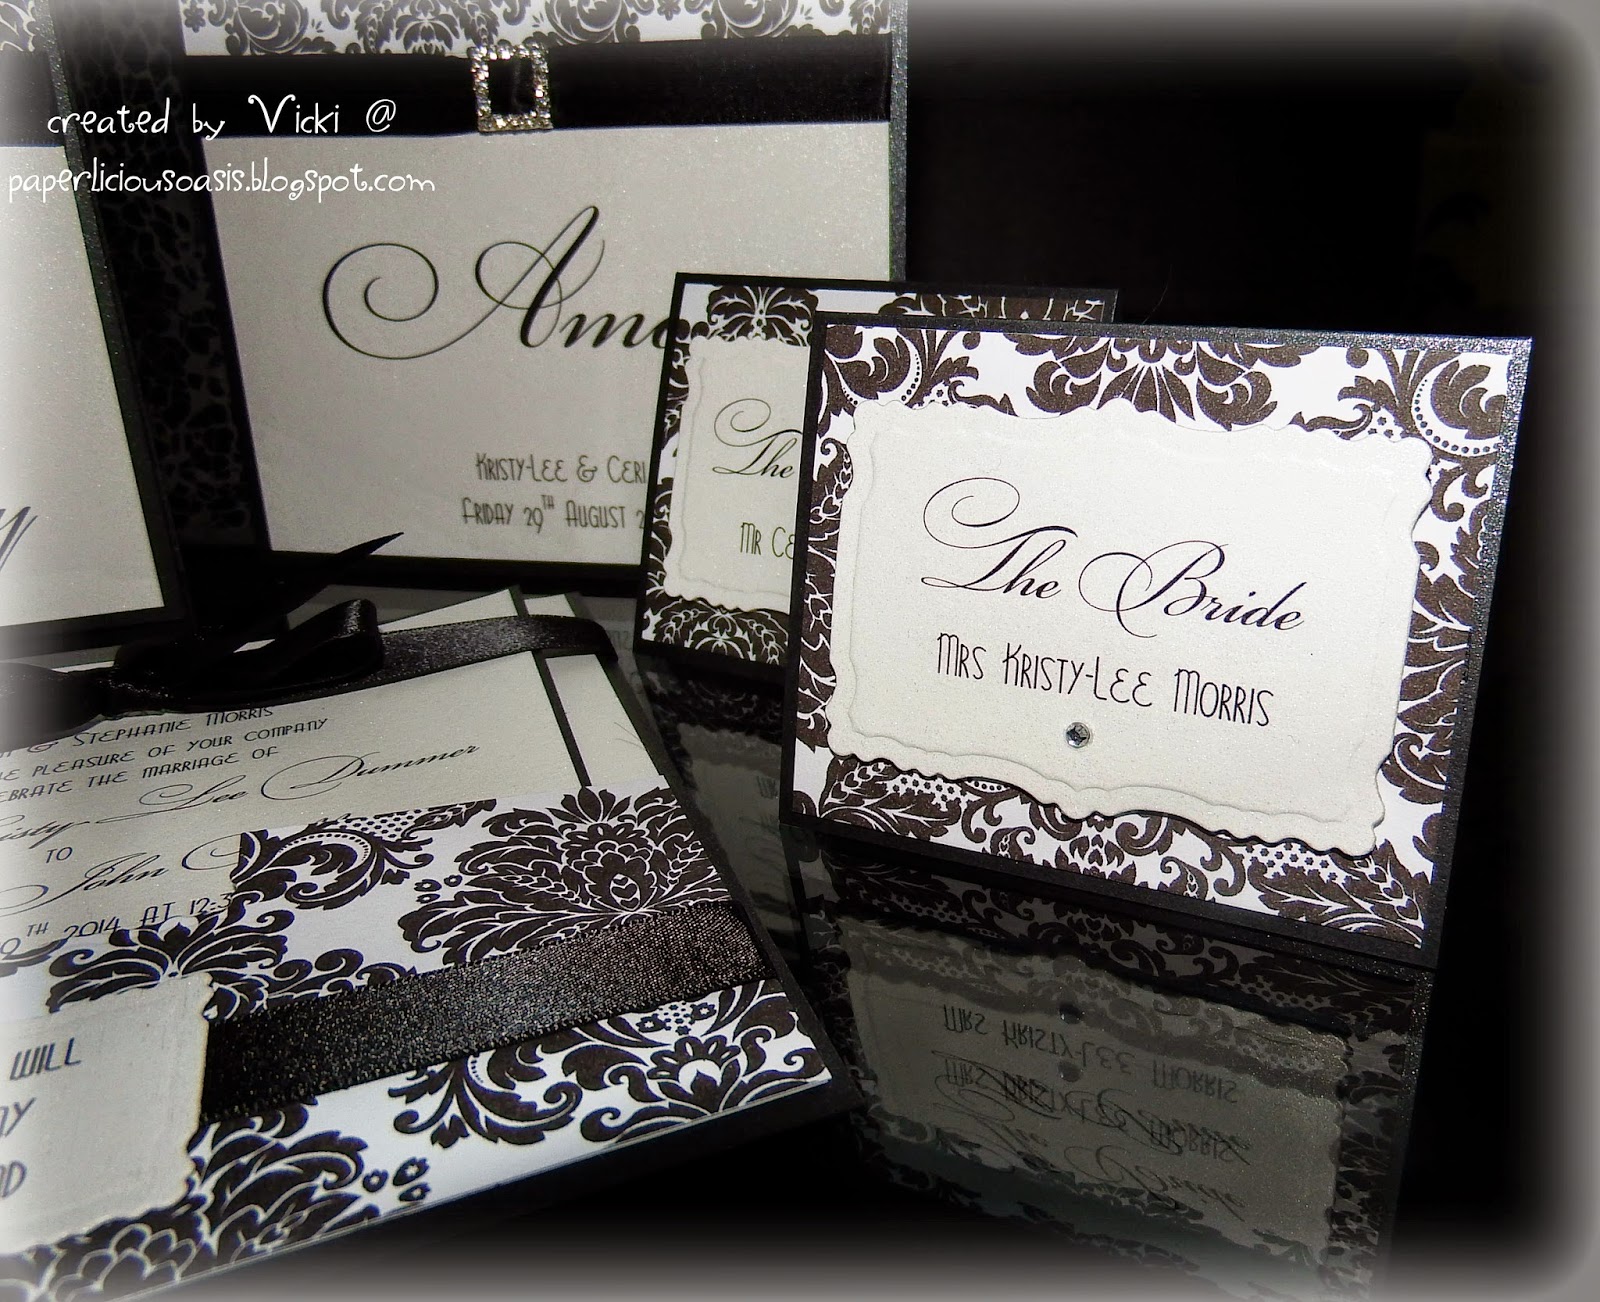 Paperlicious Oasis: Black and White Damask Wedding Invitations, Reception Place Name Cards